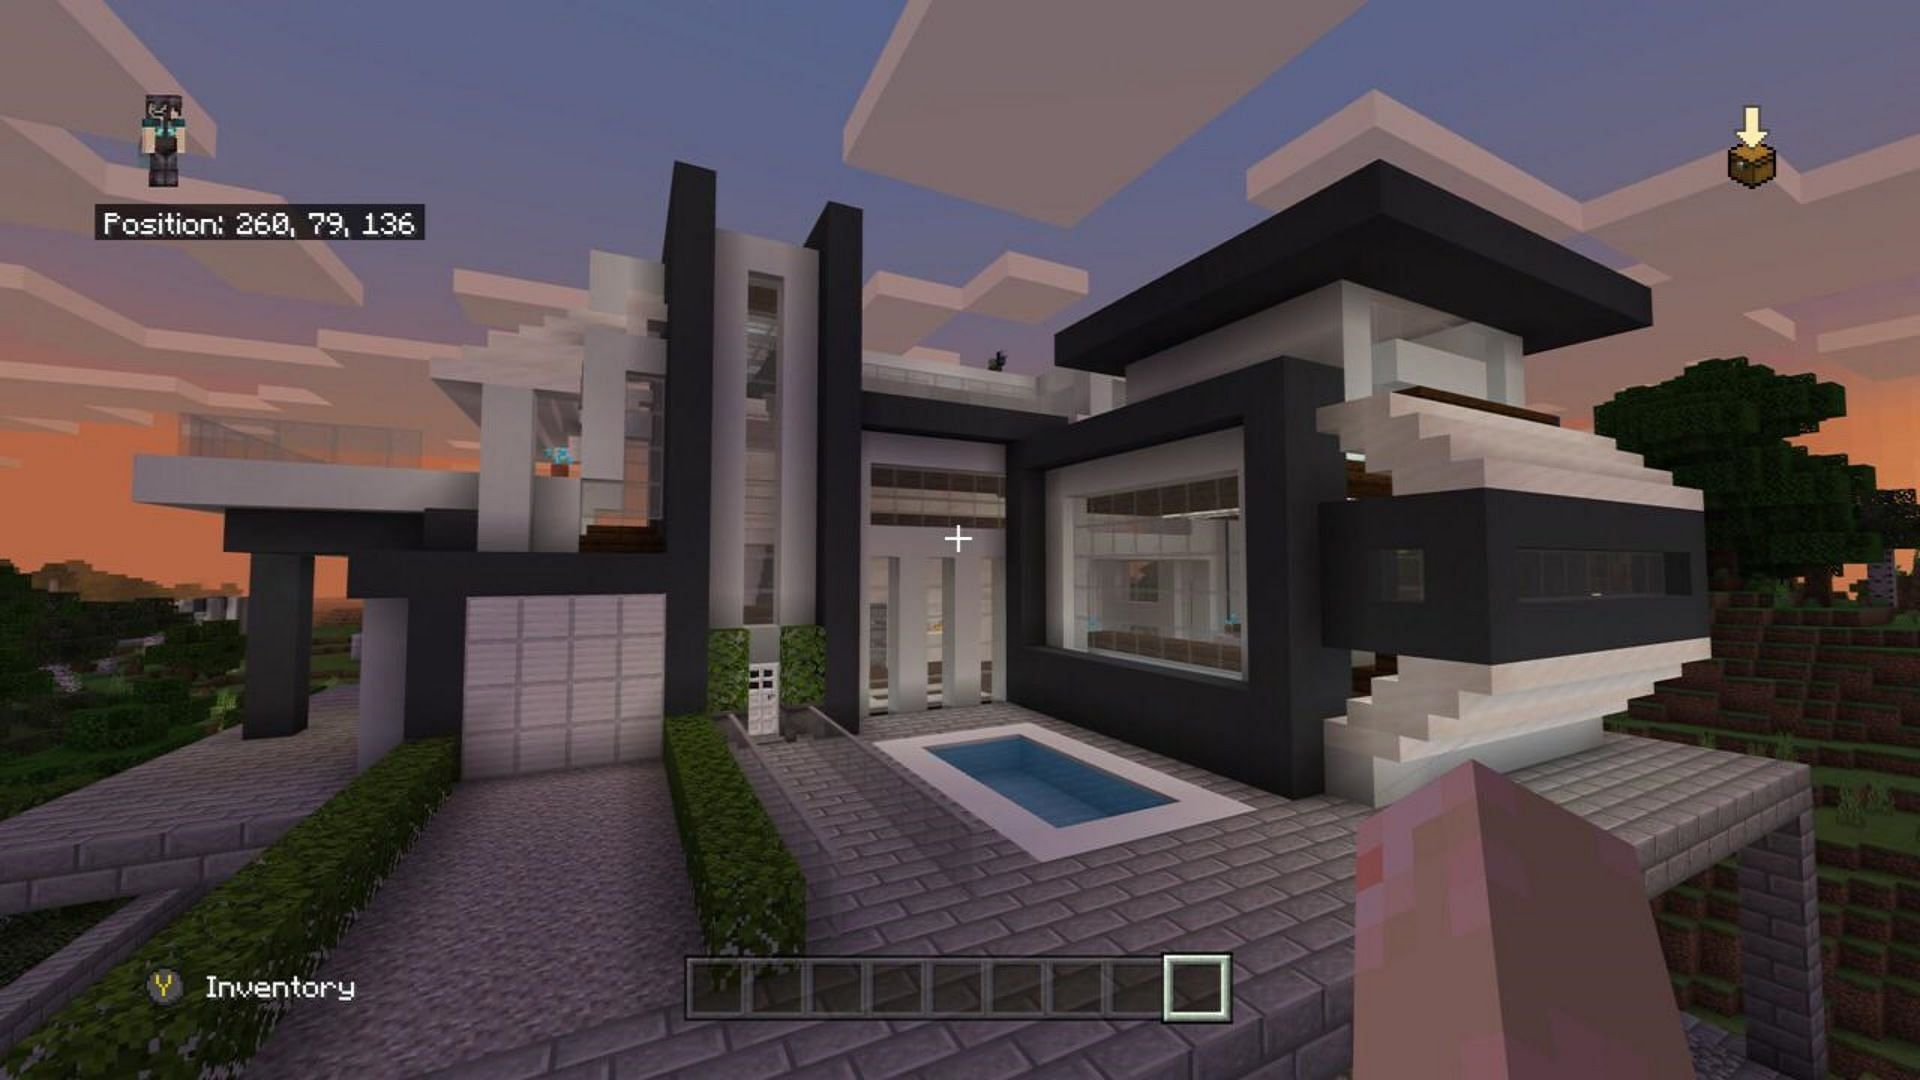 Modern house with clean exterior and interior (Image via Reddit/Gethstar1123)